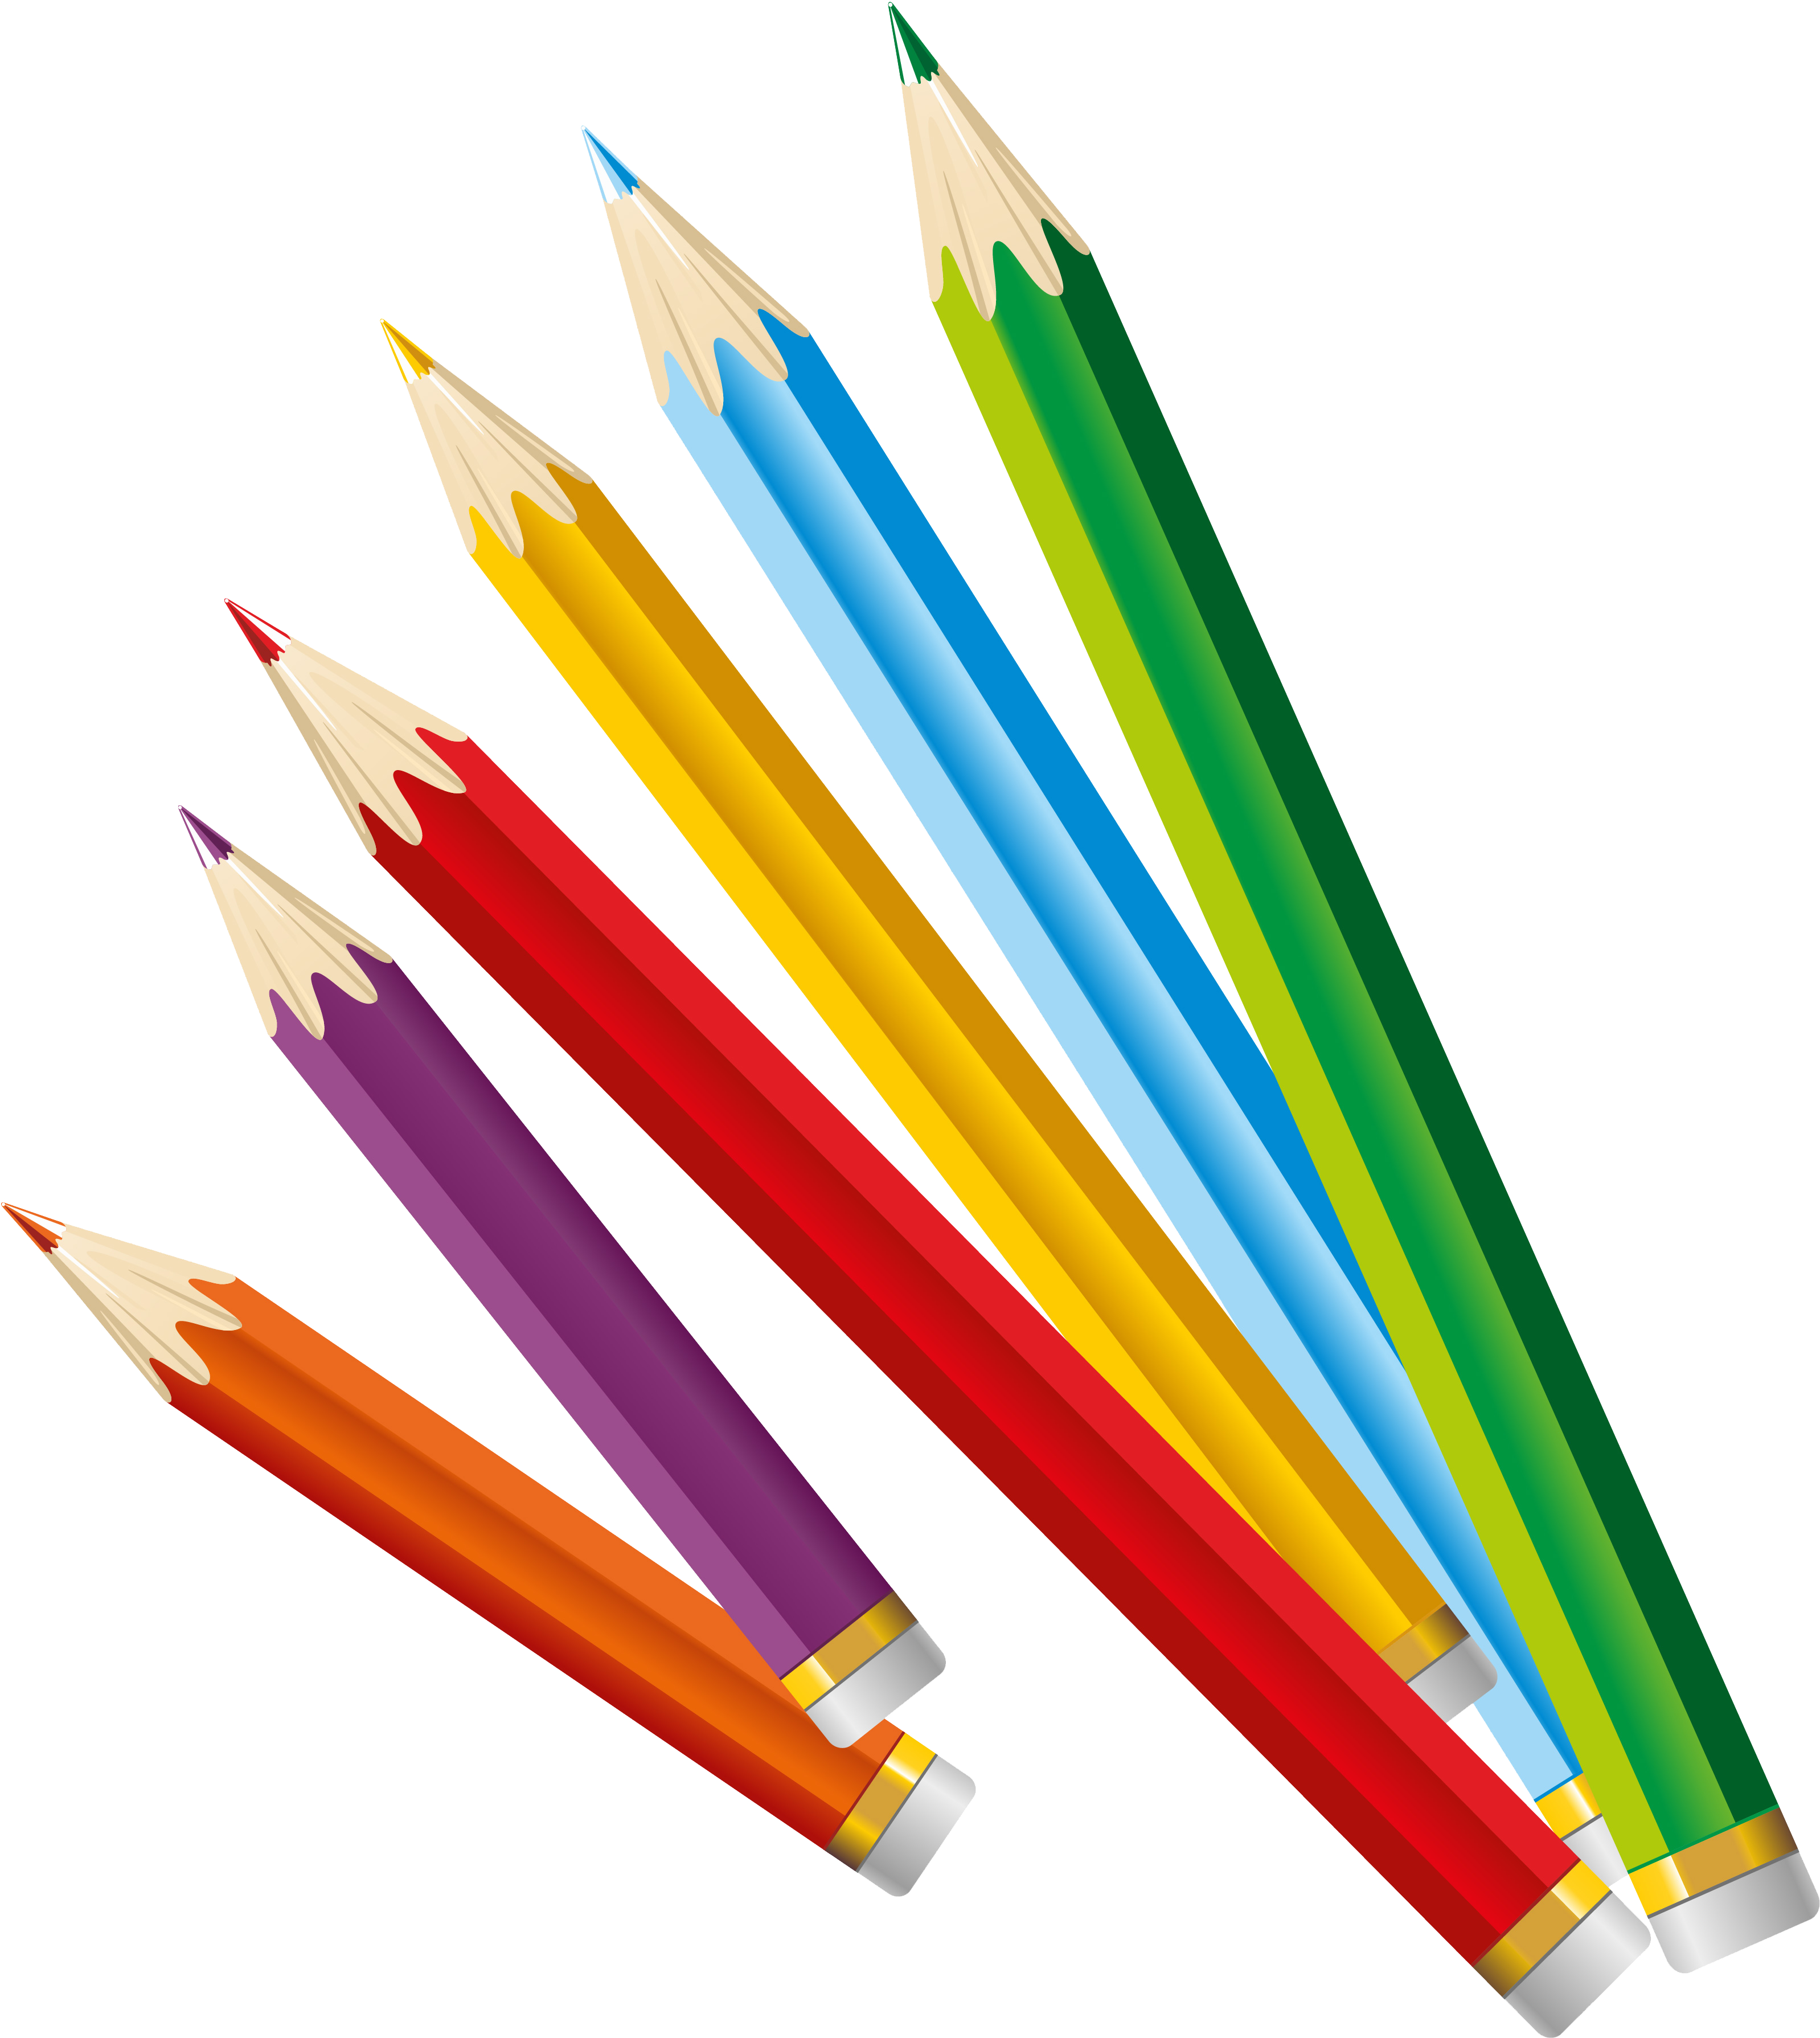 Pencil Office Supplies Writing Implement Plastic - Pencil (3196x3578)